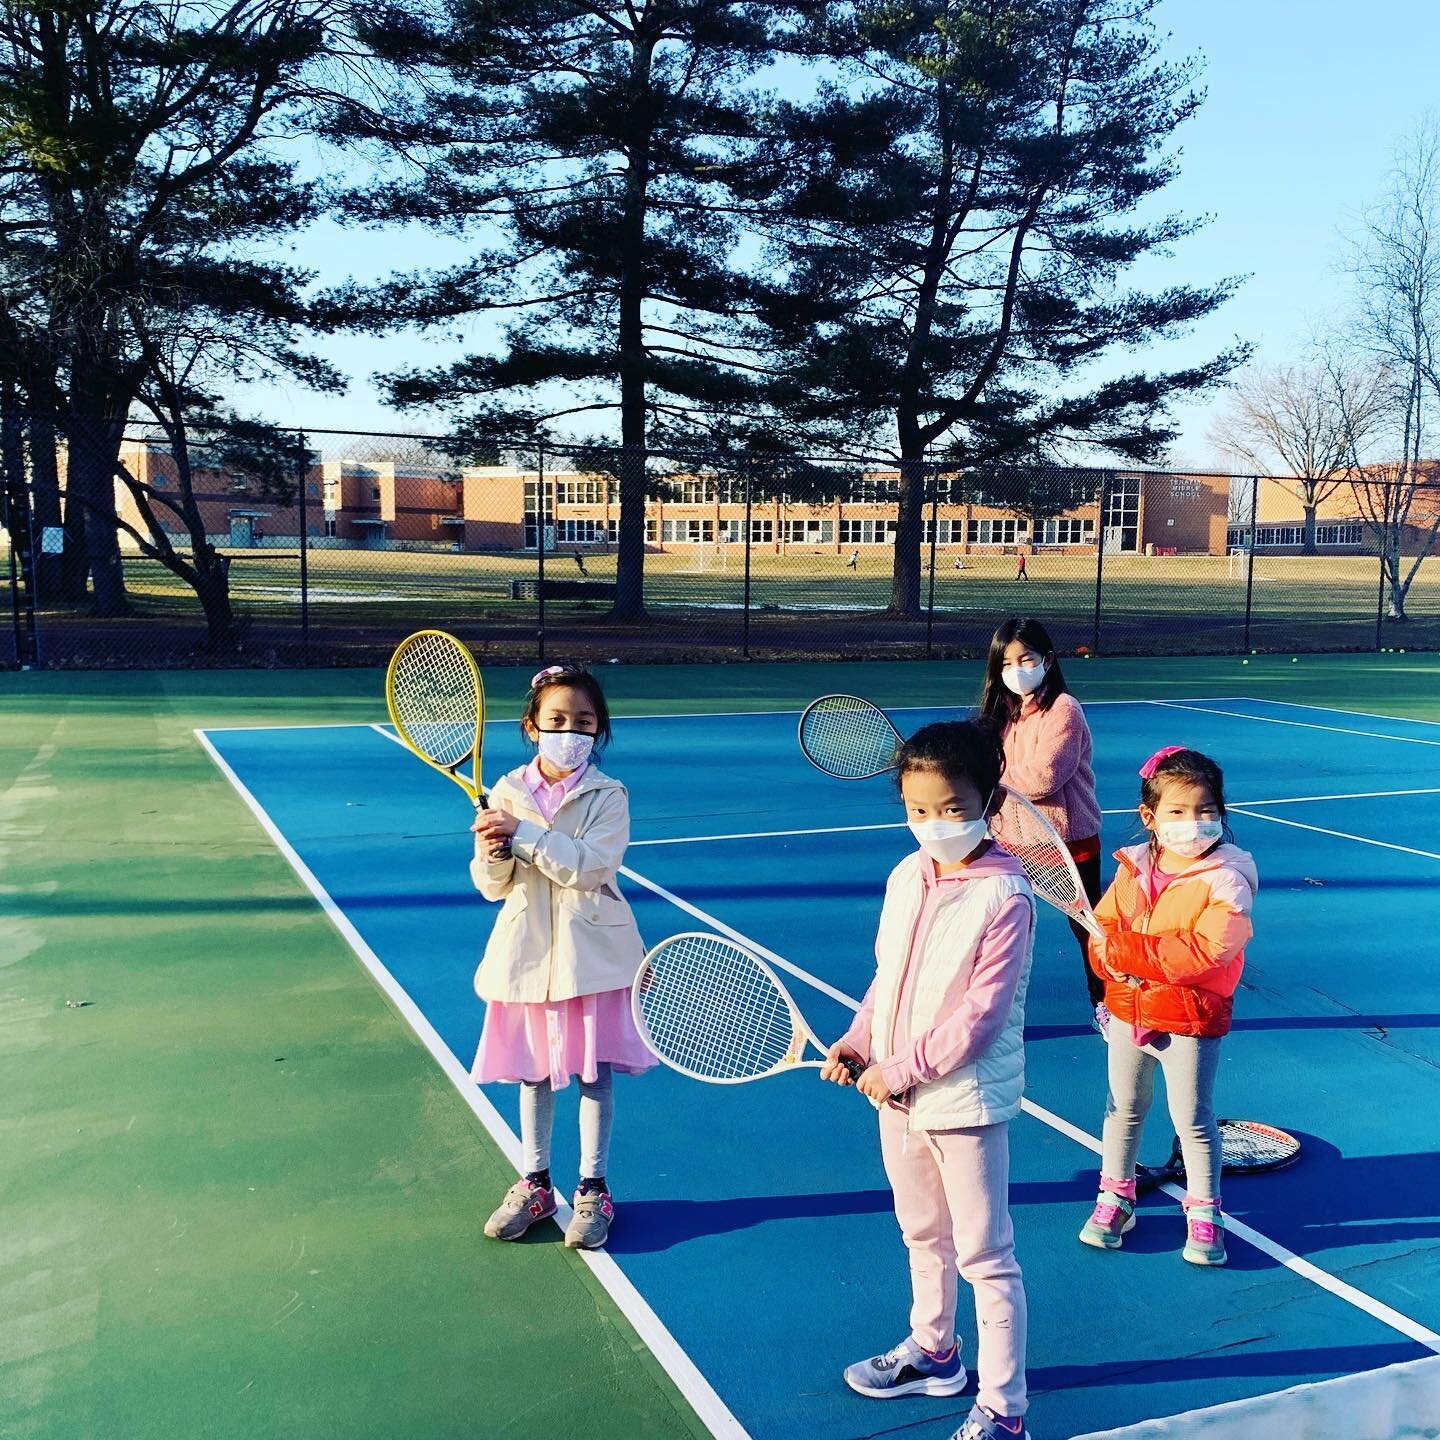 Wednesday is now these kids favorite day! Because it&rsquo;s tennis day! #tenaflynj #tenafly #tenaflymoms #bergencountynj #activitiesforkids